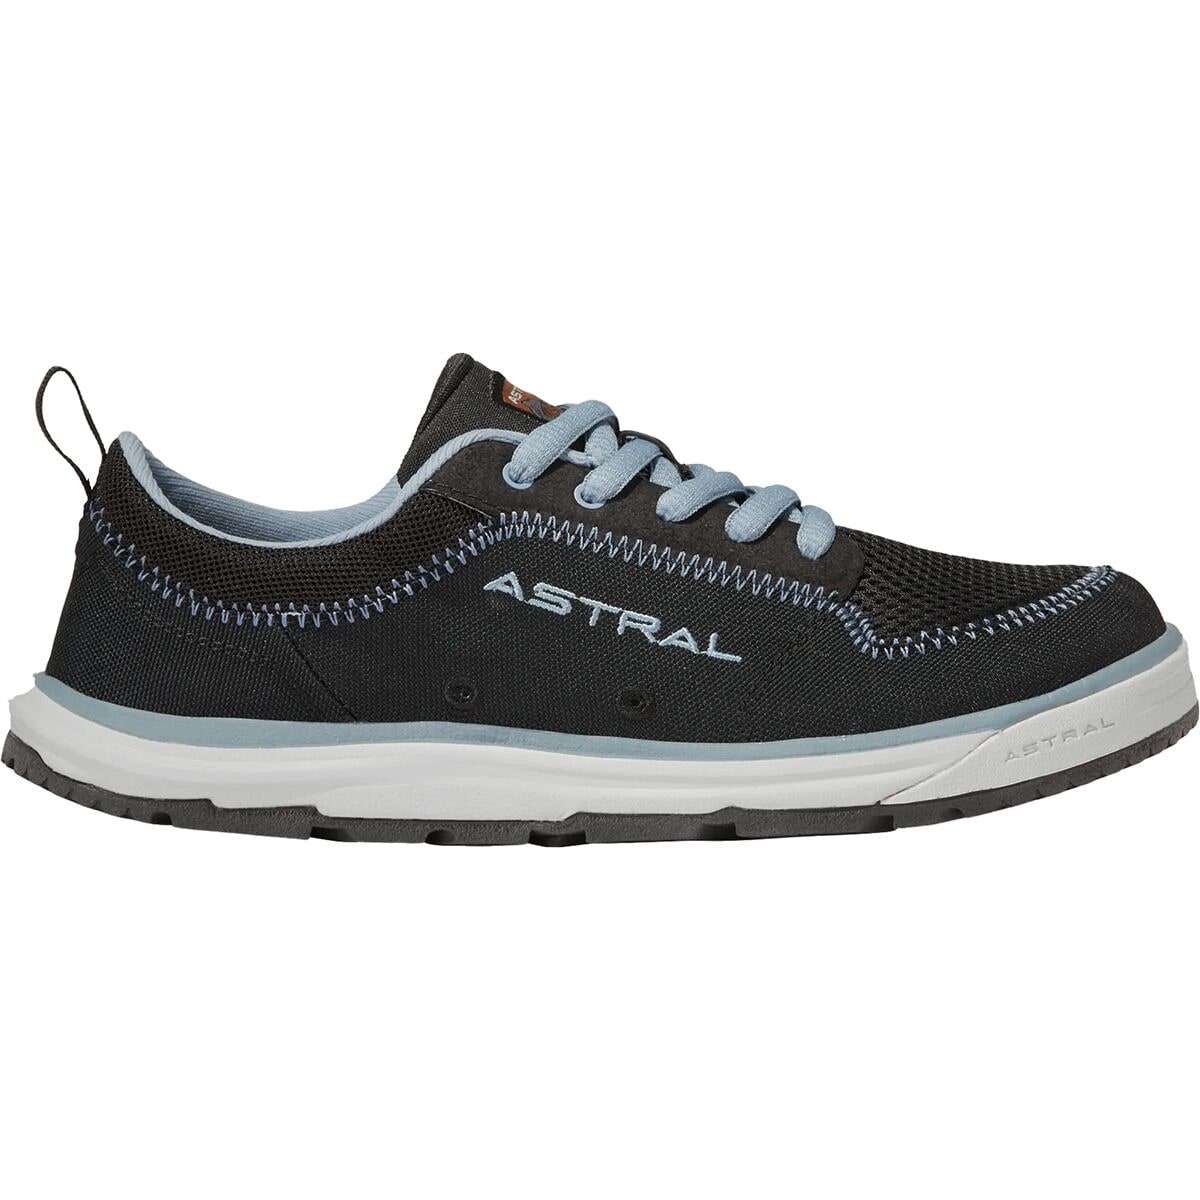 astral shoes canada